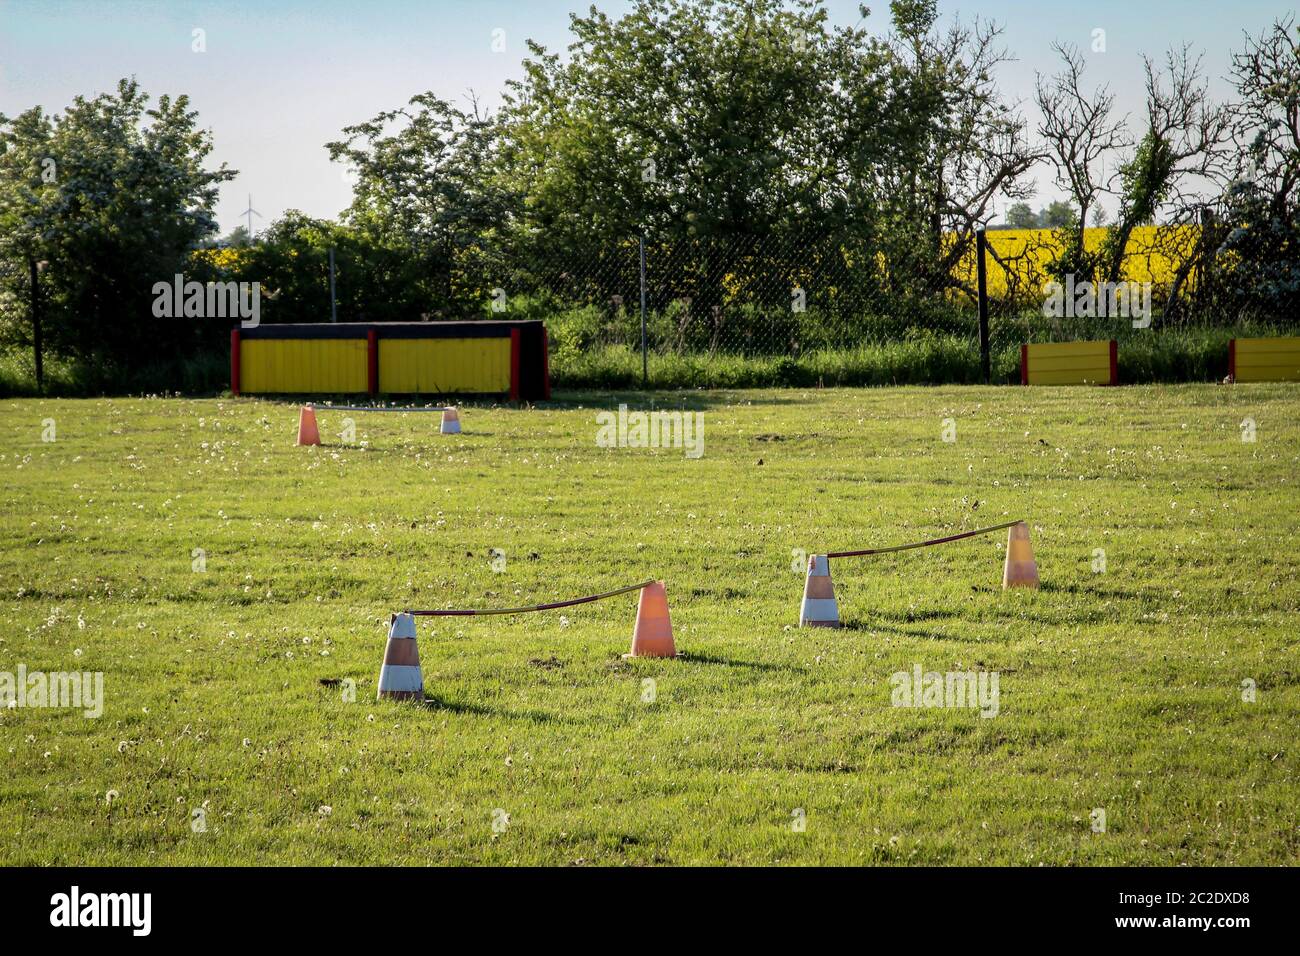 a training ground for dog owners and their dogs Stock Photo